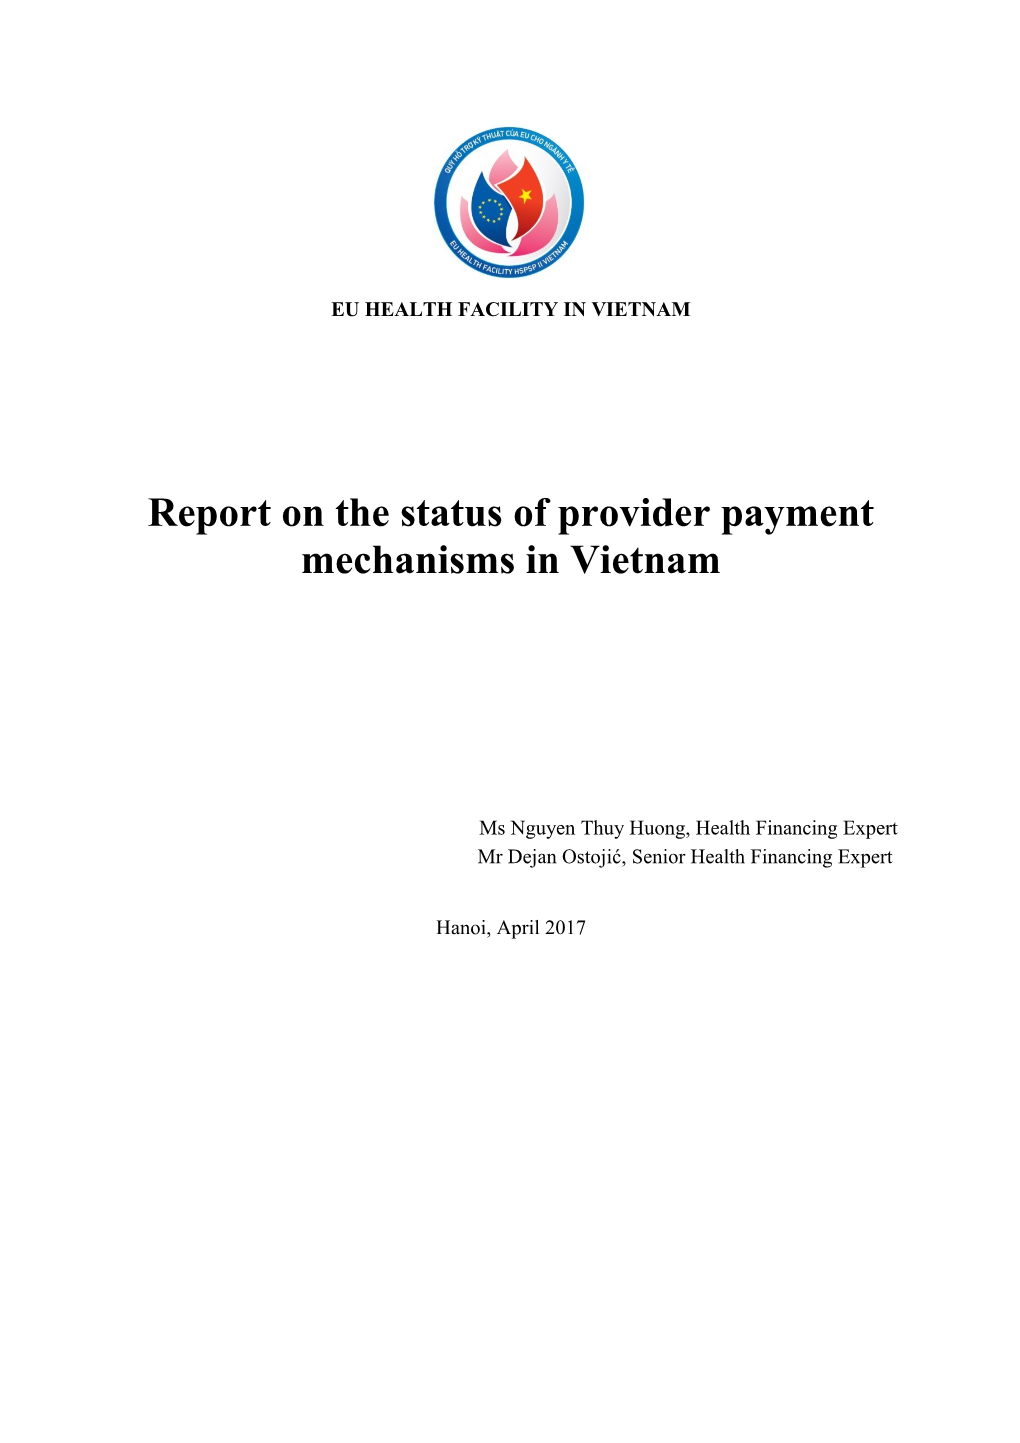 Report on the Status of Provider Payment Mechanisms in Vietnam